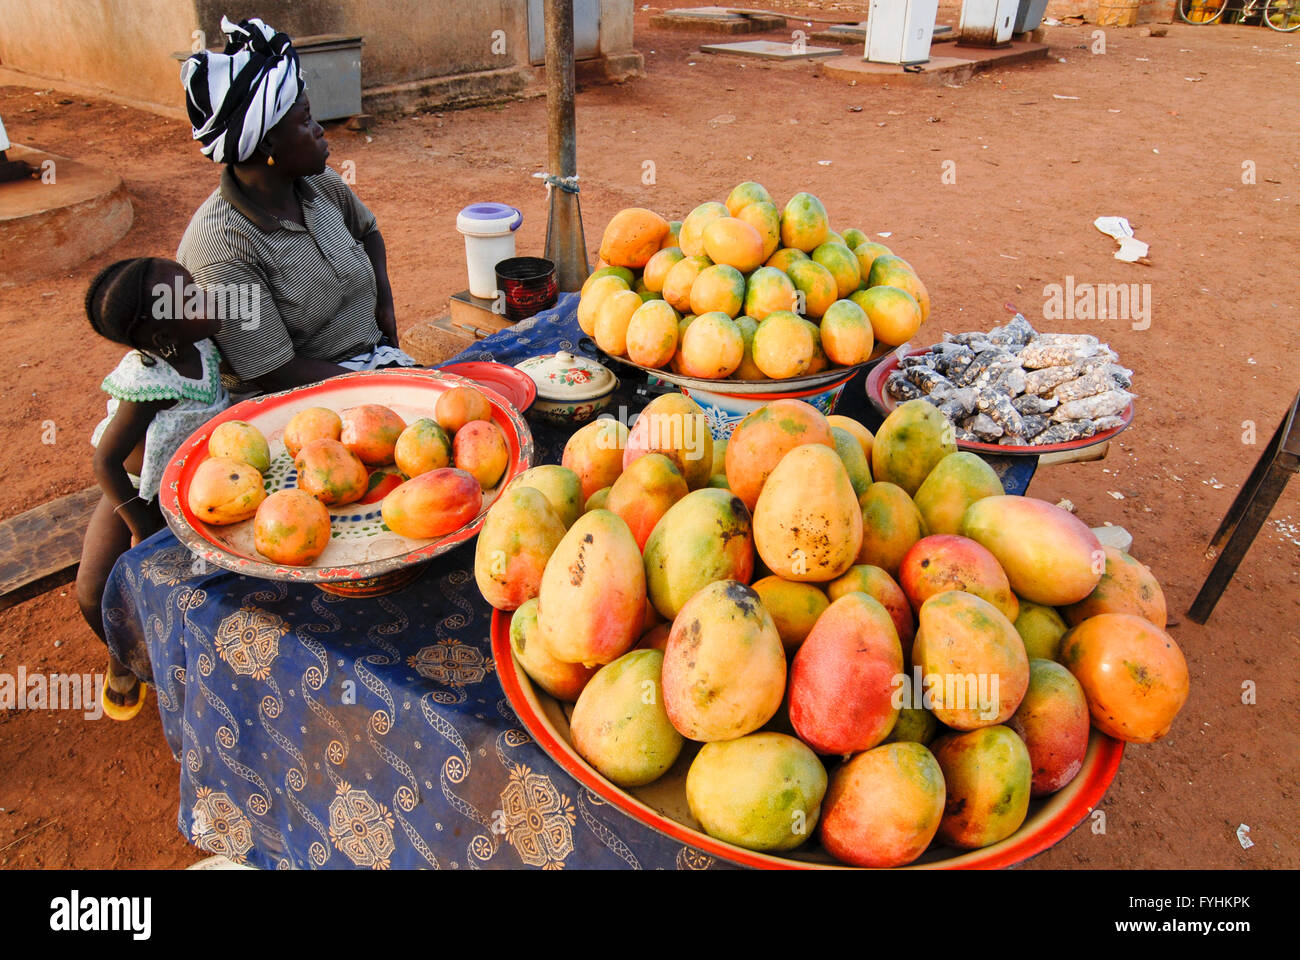 Burkina Faso, mother and child sell Mangoes at market in village Stock Photo